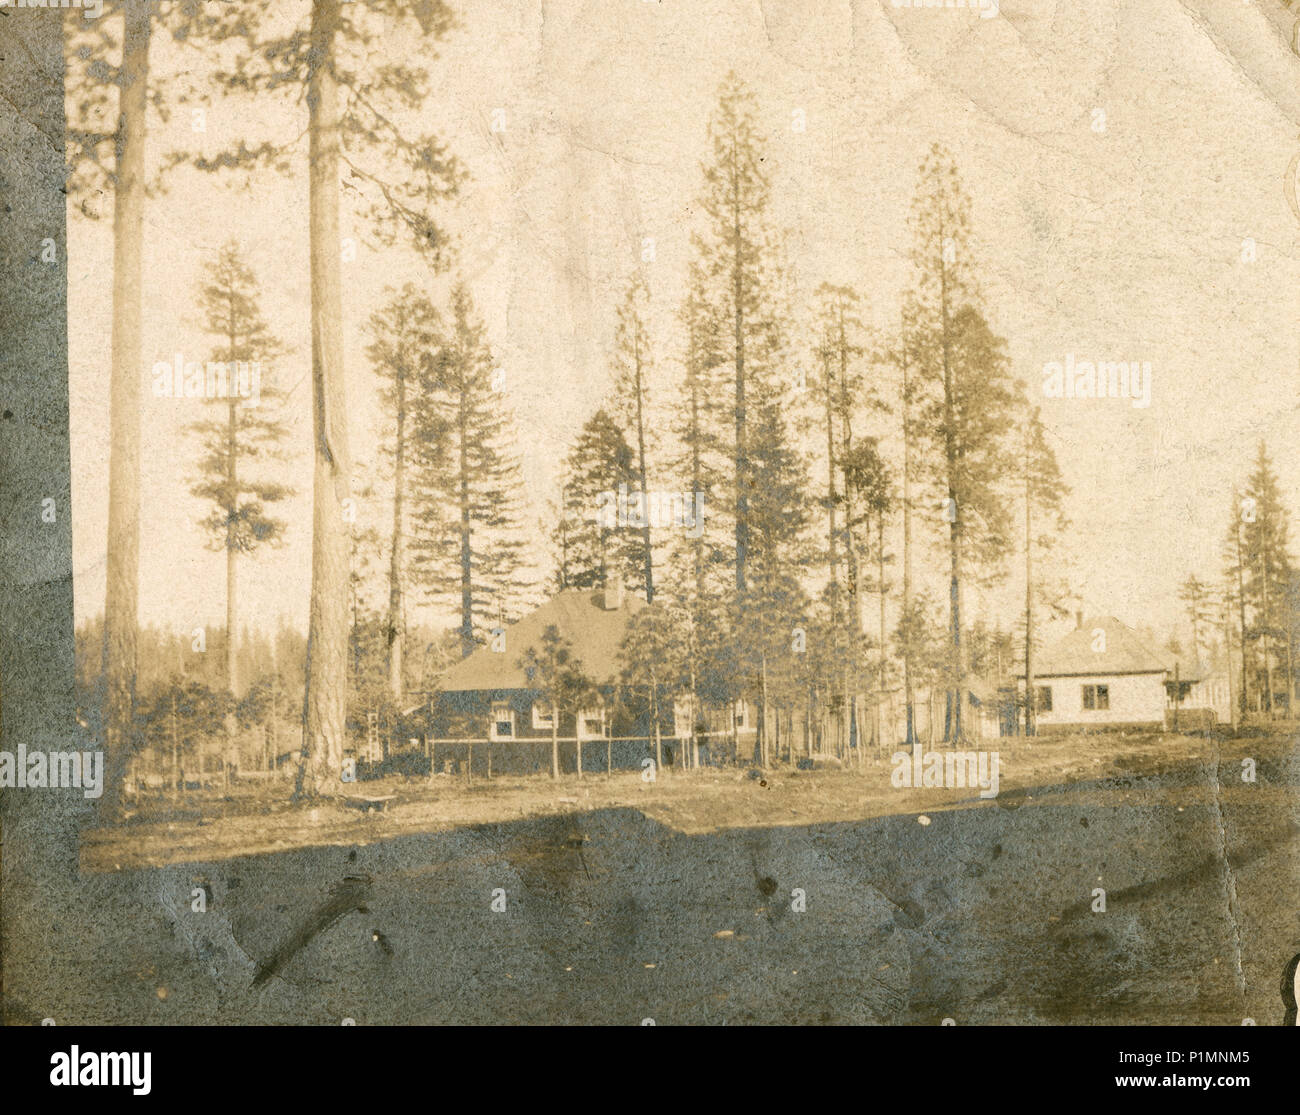 Antique circa 1910 photograph, Mrs. Newcomb’s Bungalow in Stirling City, California. Stirling City was founded in 1903 by the Diamond Match Company of Barberton, Ohio, as a center for processing cut lumber from the surrounding forests. SOURCE: ORIGINAL PHOTOGRAPH. Stock Photo